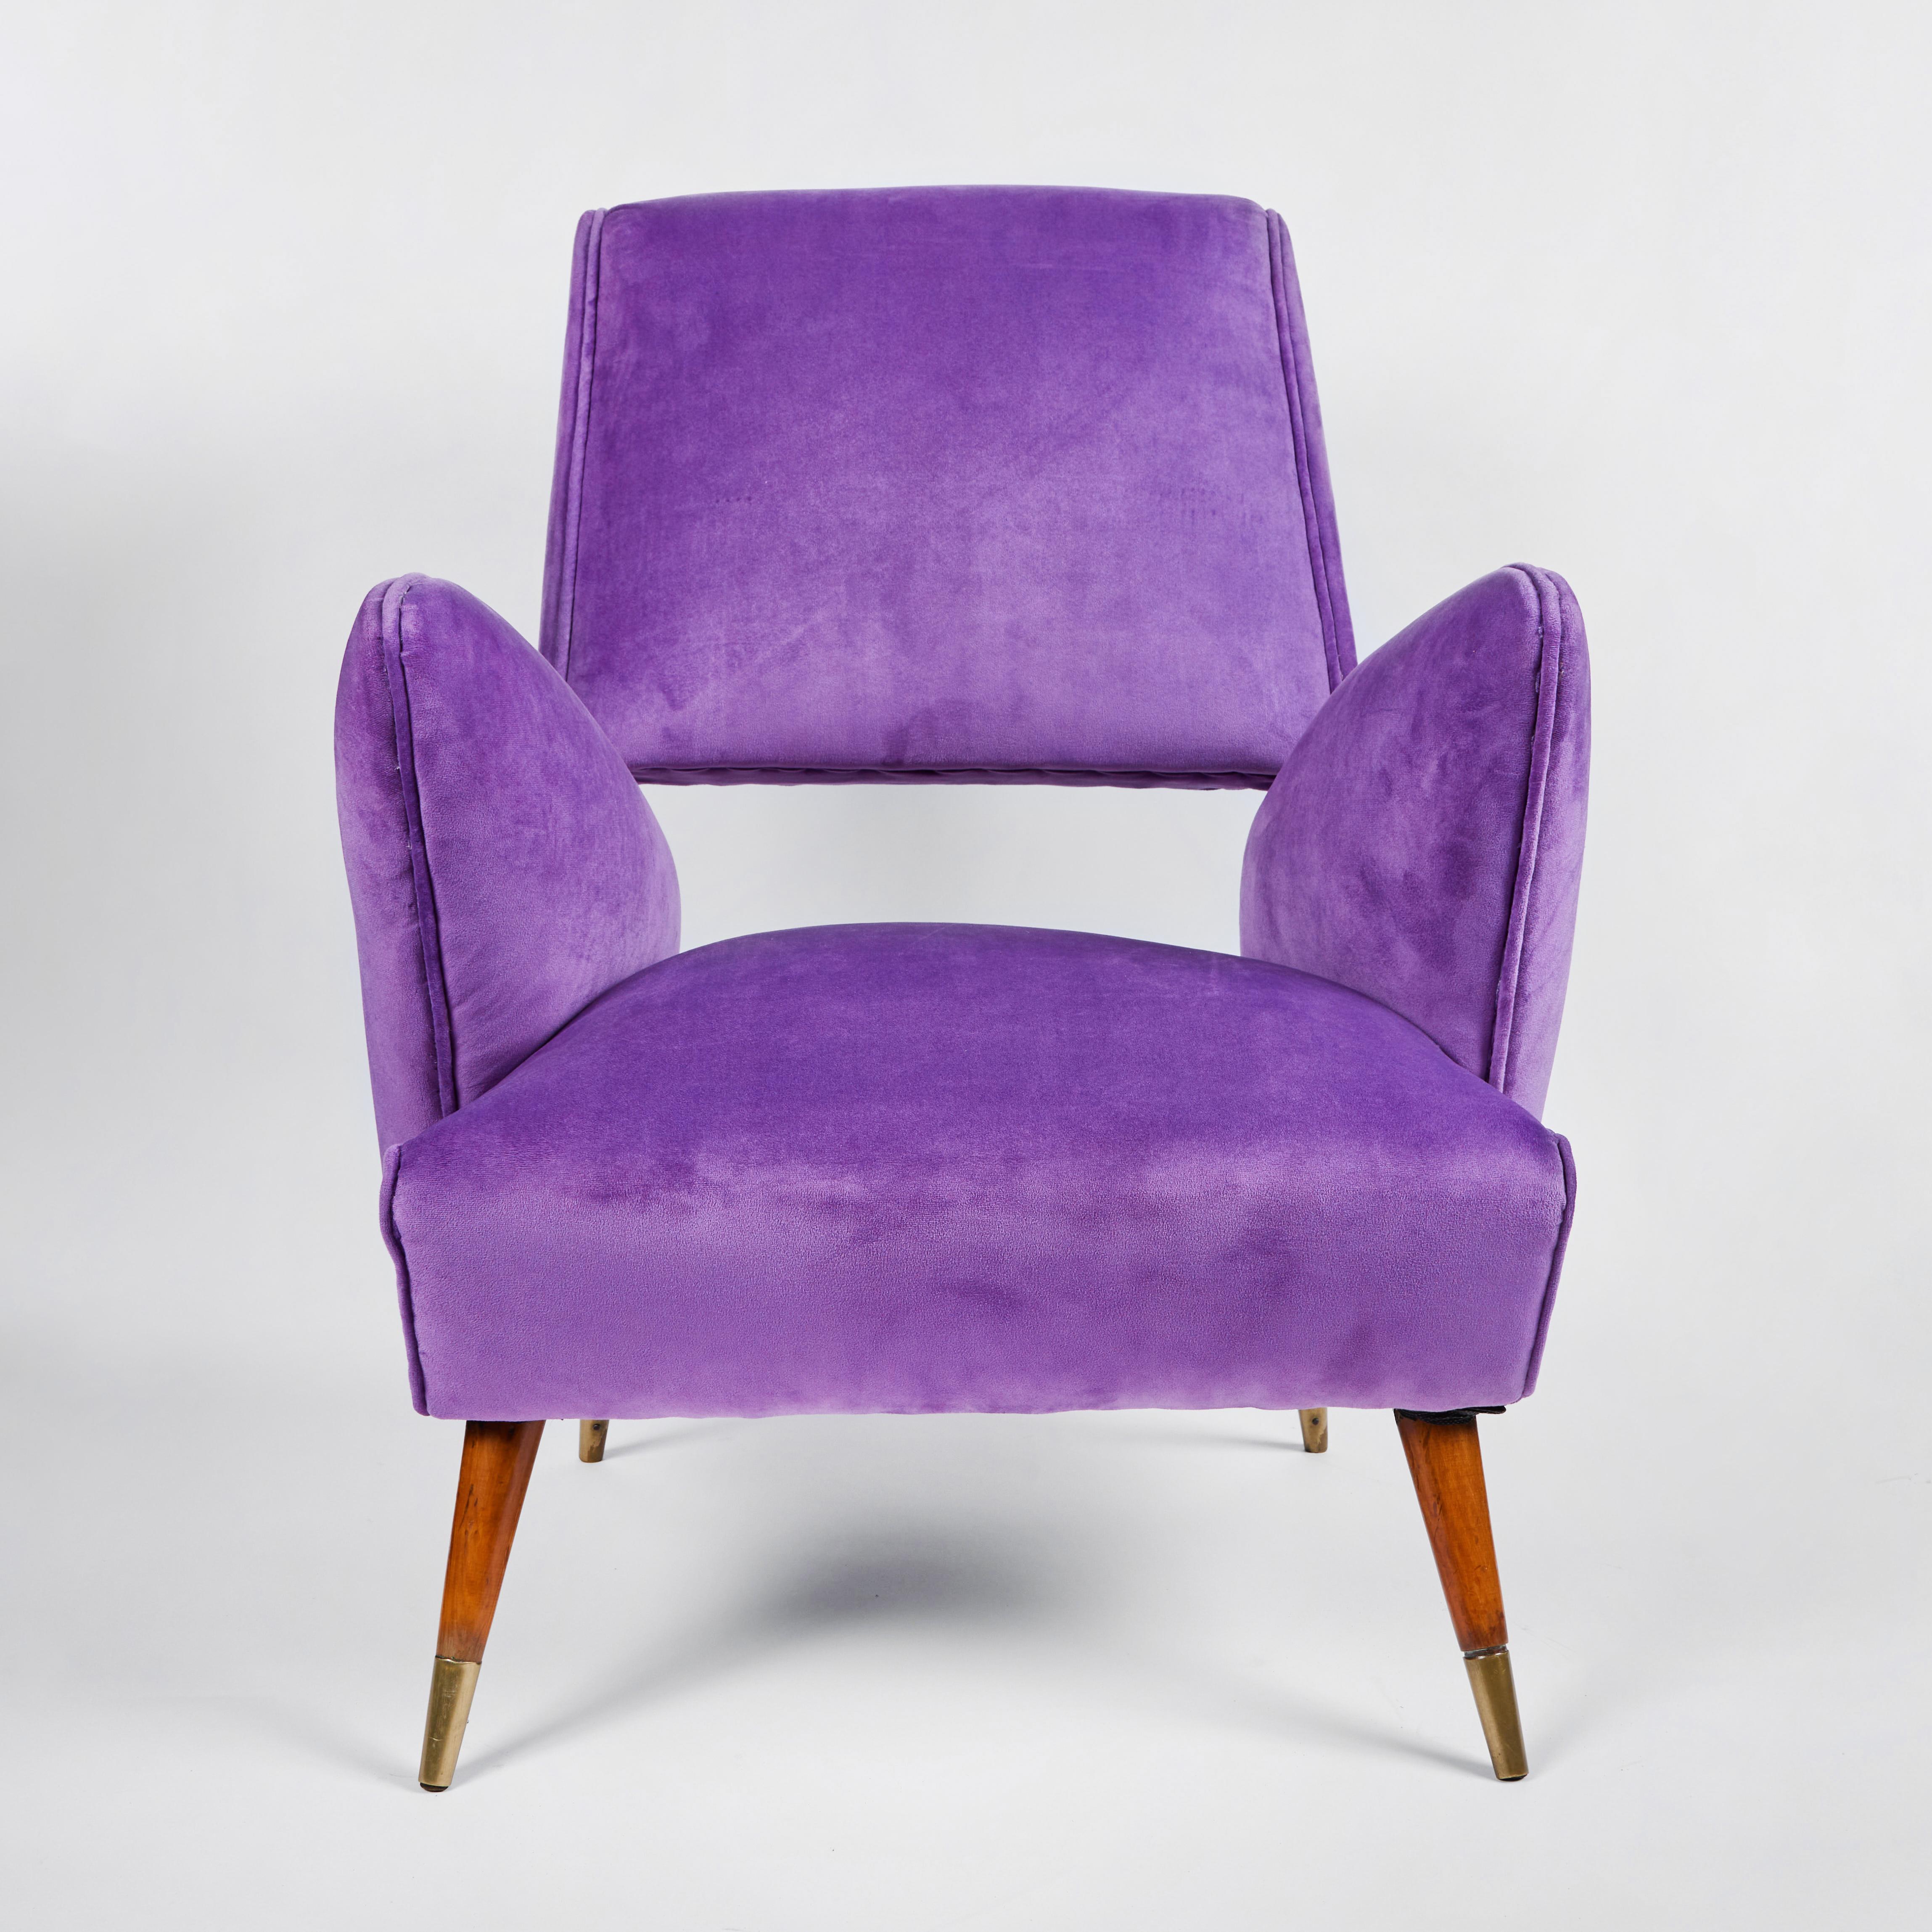 Chic pair of sculptural Italian mid-century chairs by Nino Zoncada, circa 1950's. Chairs have walnut legs with brass sabots.  Upholstered  in a purple microfiber fabric.